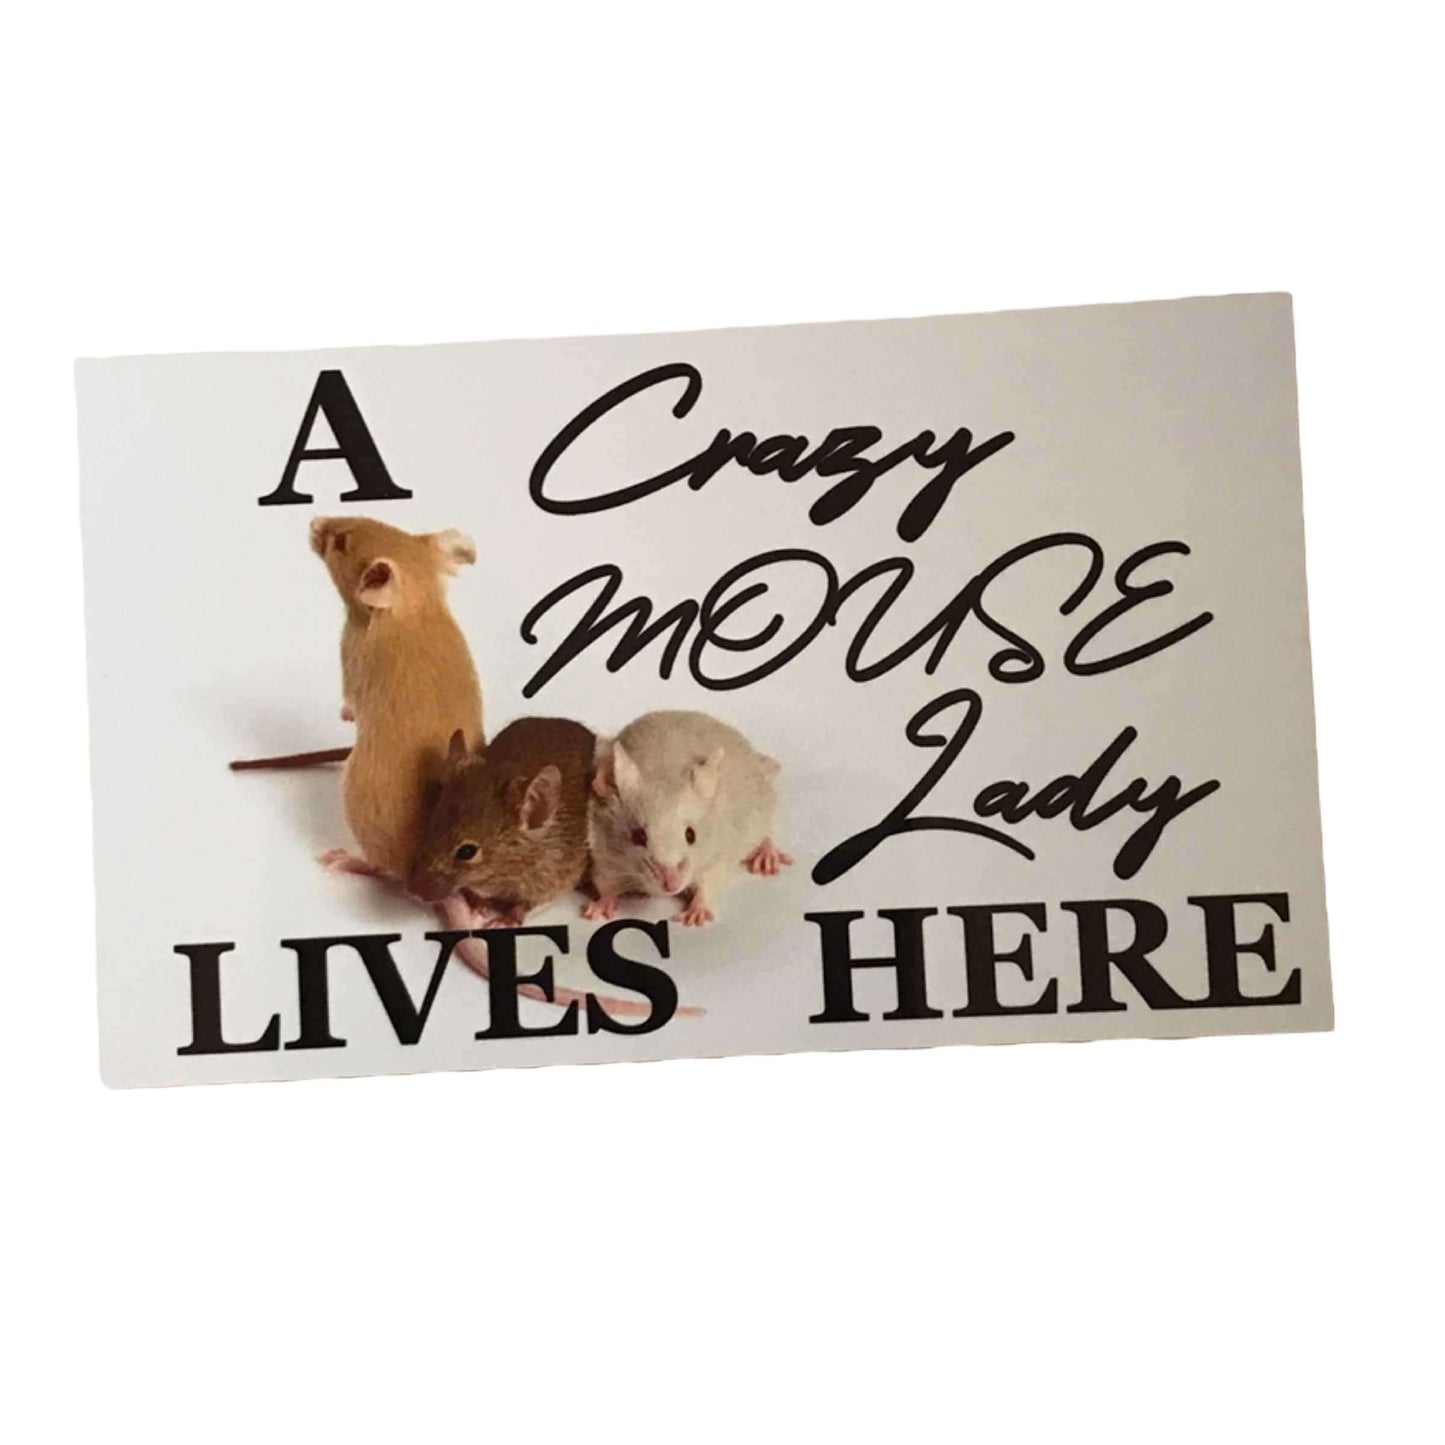 Crazy Mouse Lady Lives Here Sign - The Renmy Store Homewares & Gifts 